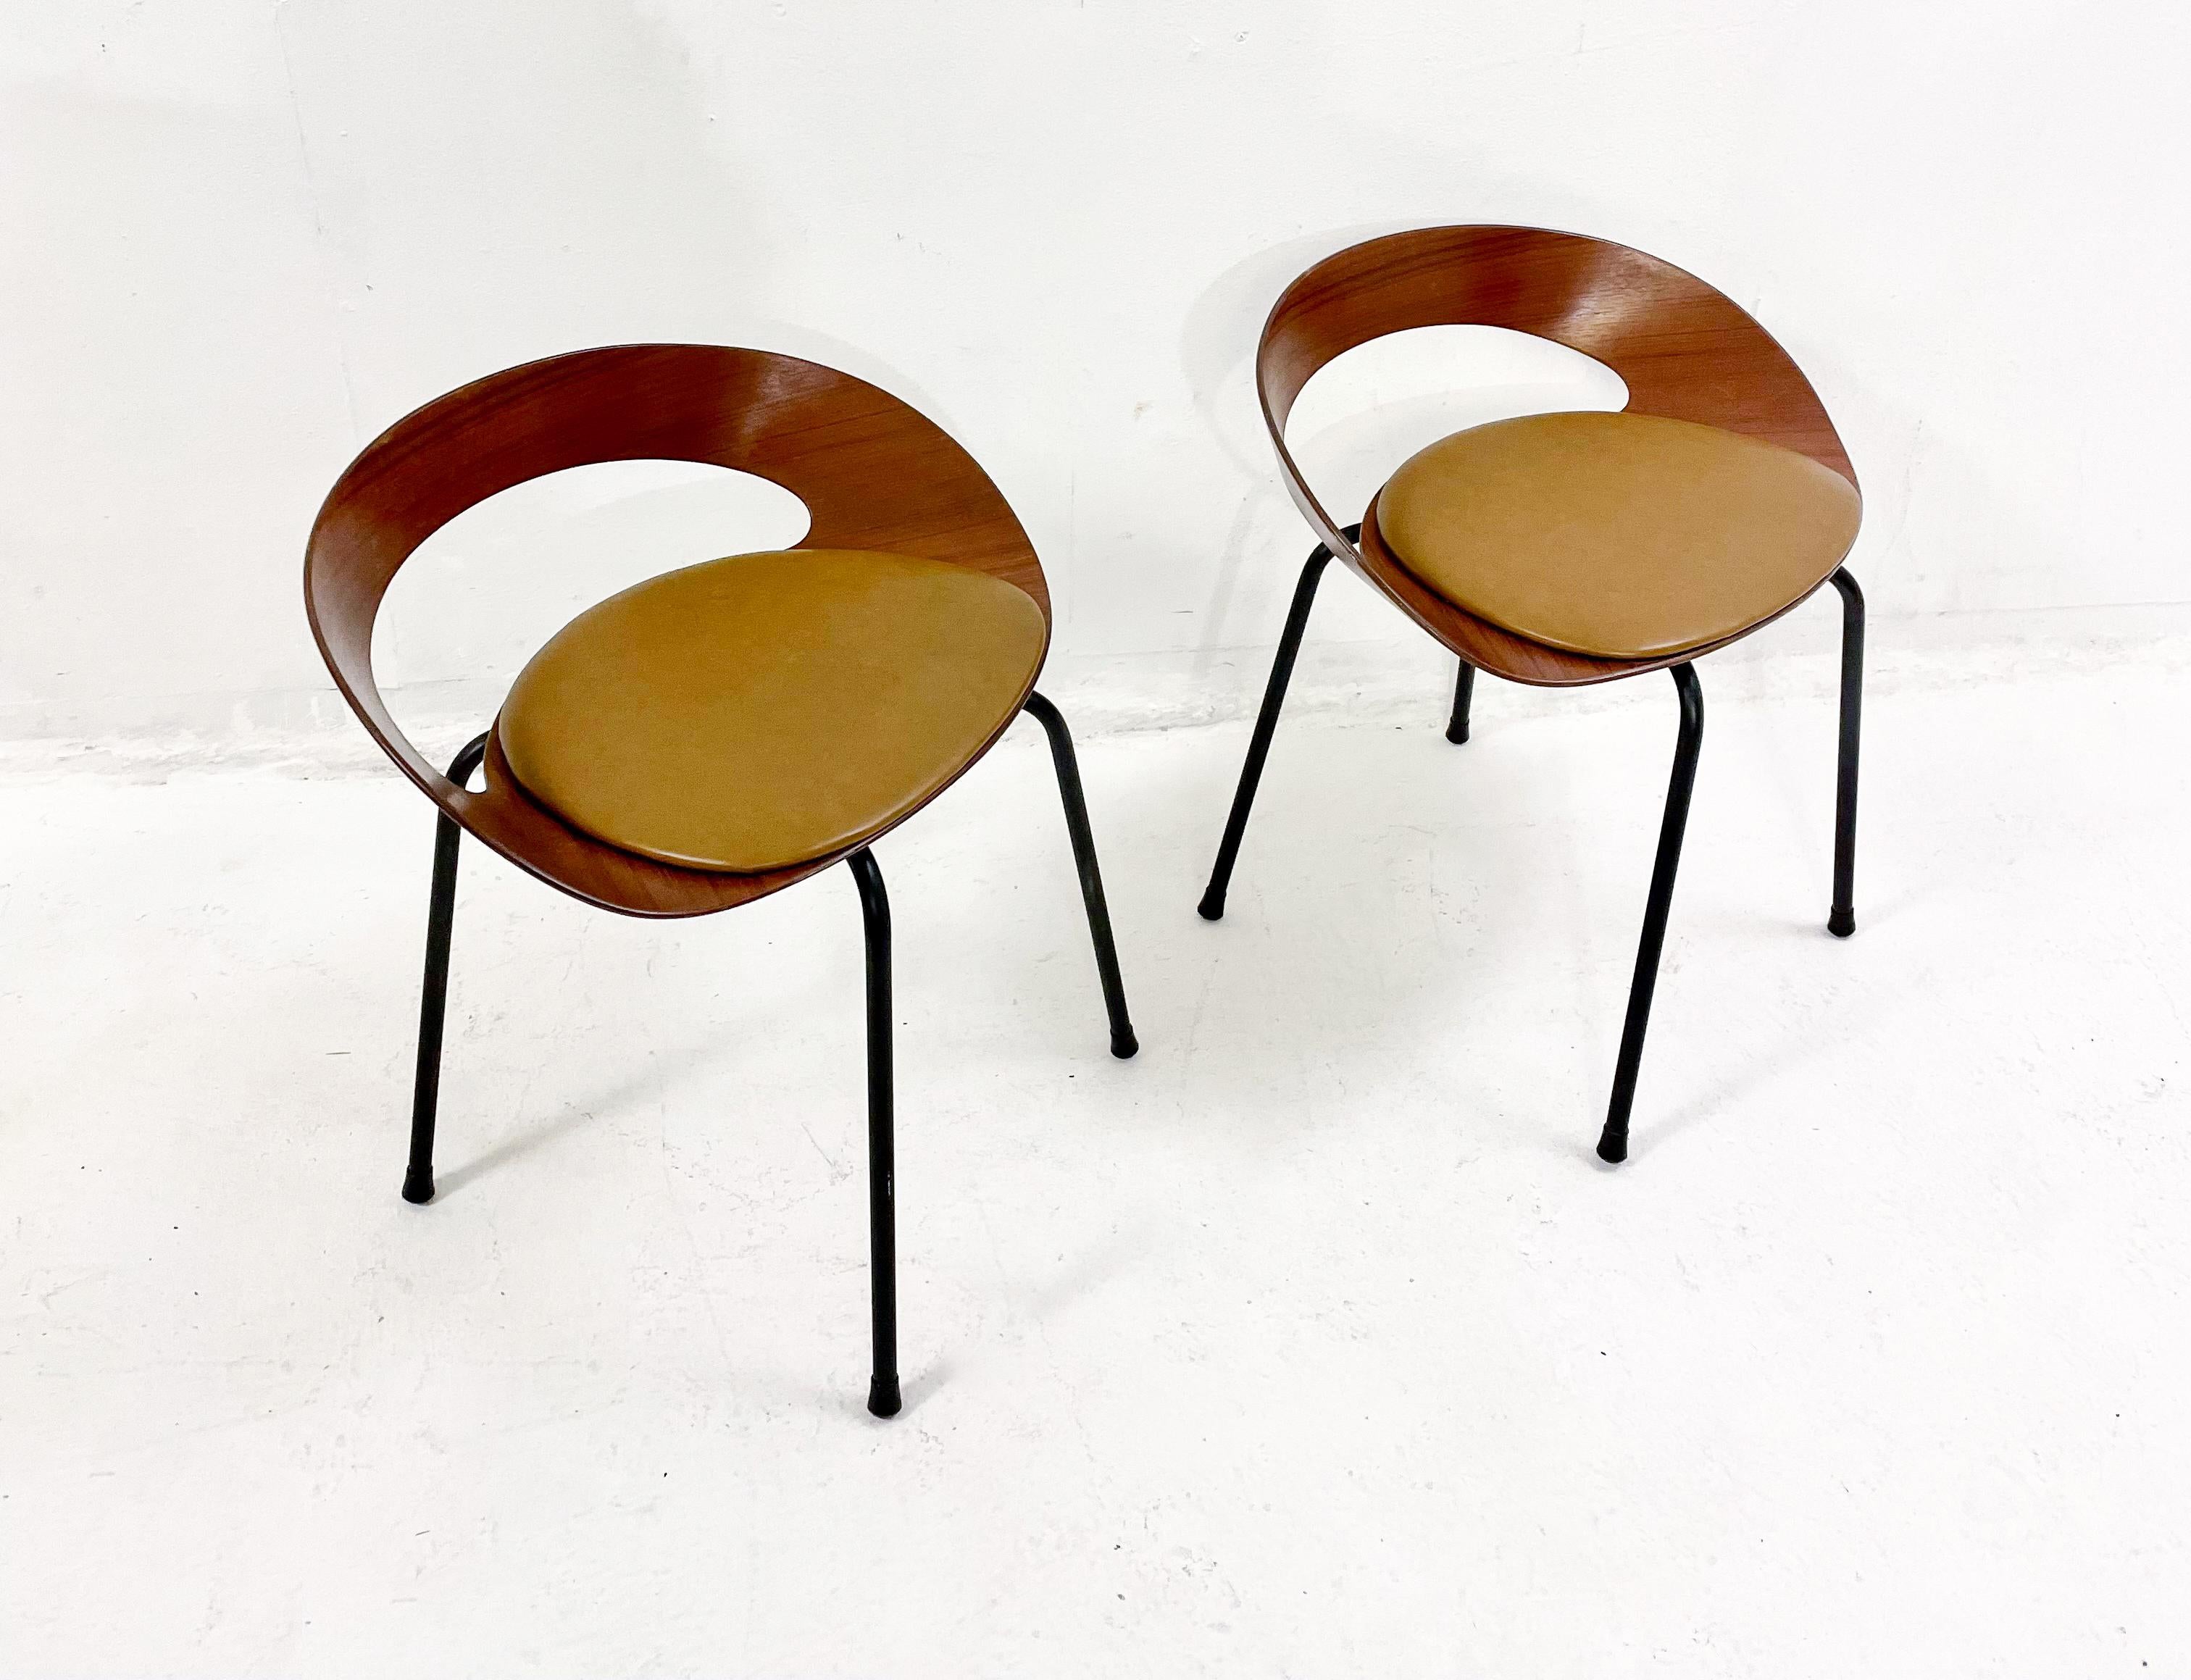 Mid-Century Modern PA1 chair by Luciano Nustrini for Poltronova, 1957, Italy - two available 
Wood and leather.
   